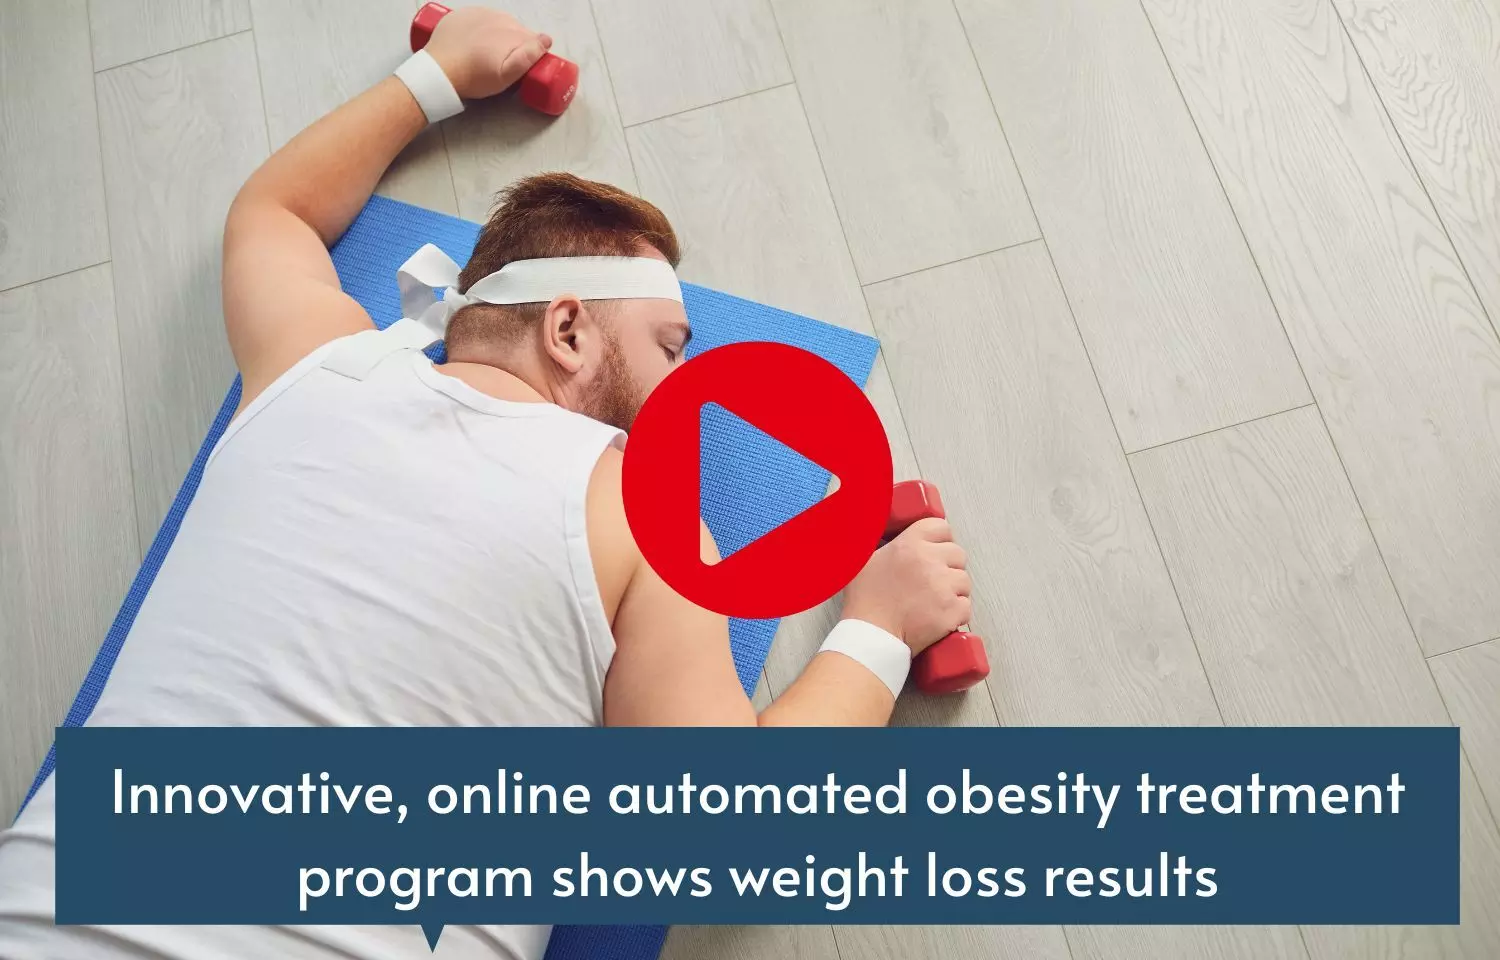 Innovative, online automated obesity treatment program shows weight loss results